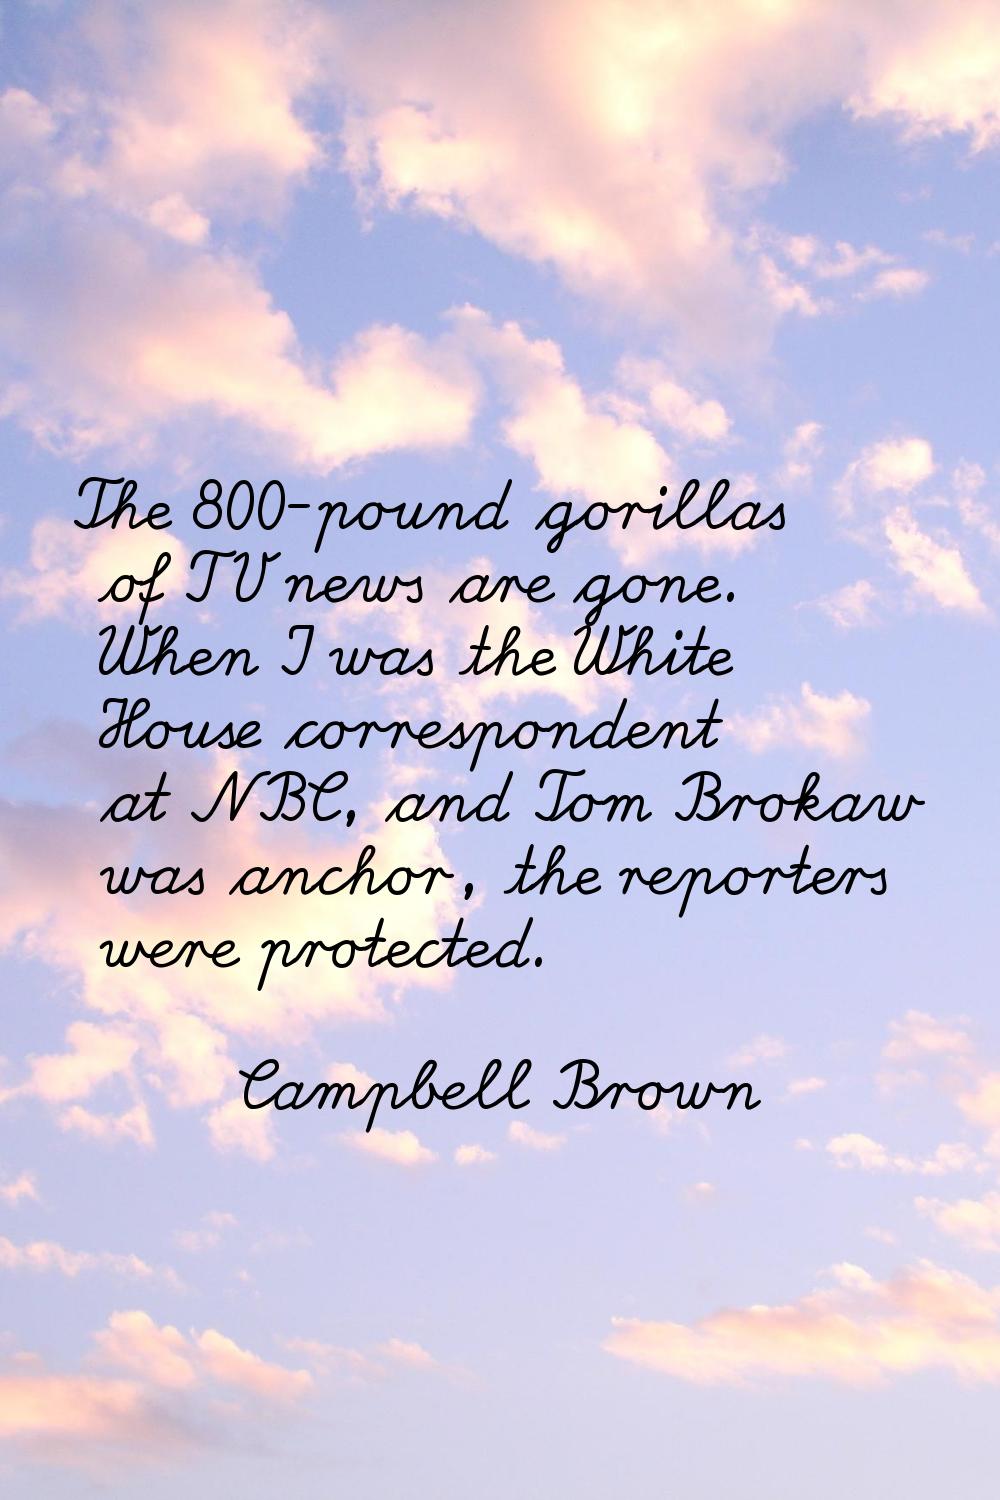 The 800-pound gorillas of TV news are gone. When I was the White House correspondent at NBC, and To